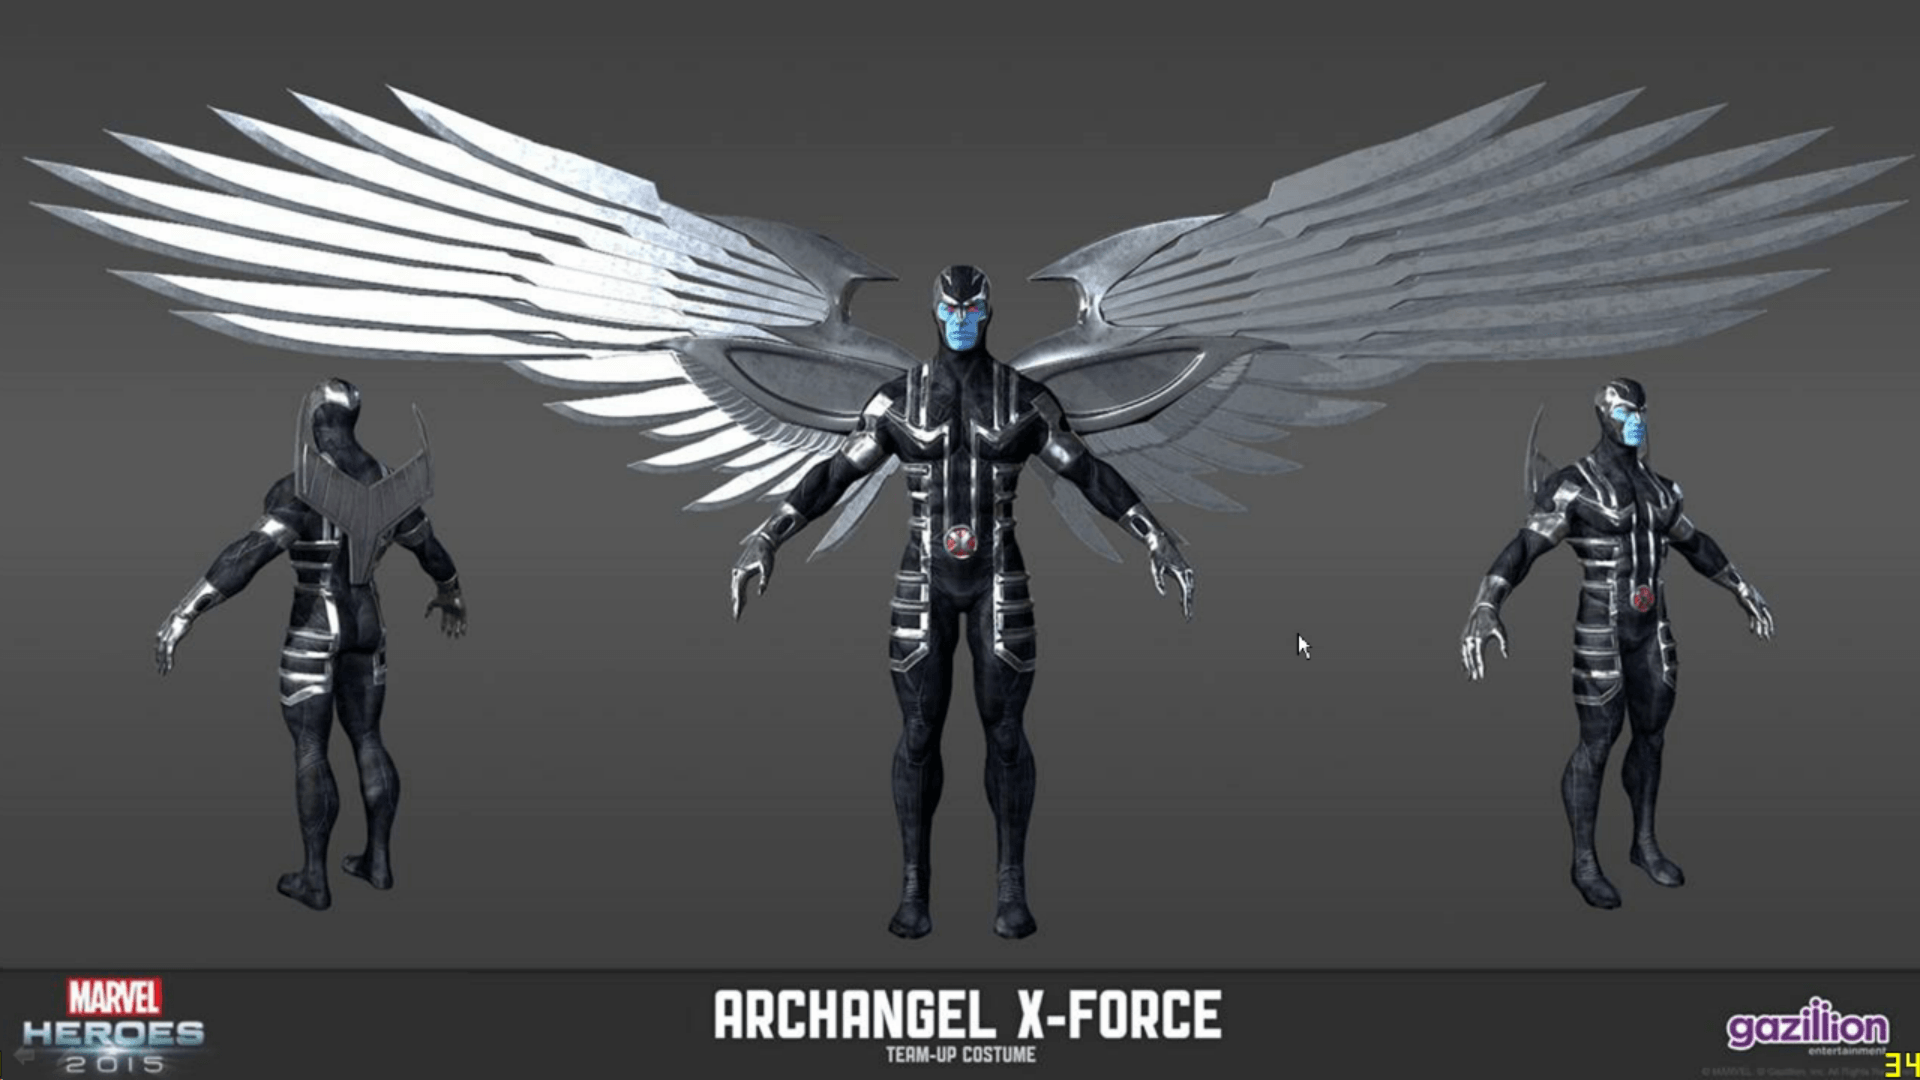 Marvel Heroes Angel Picture and Ideas on Meta Networks